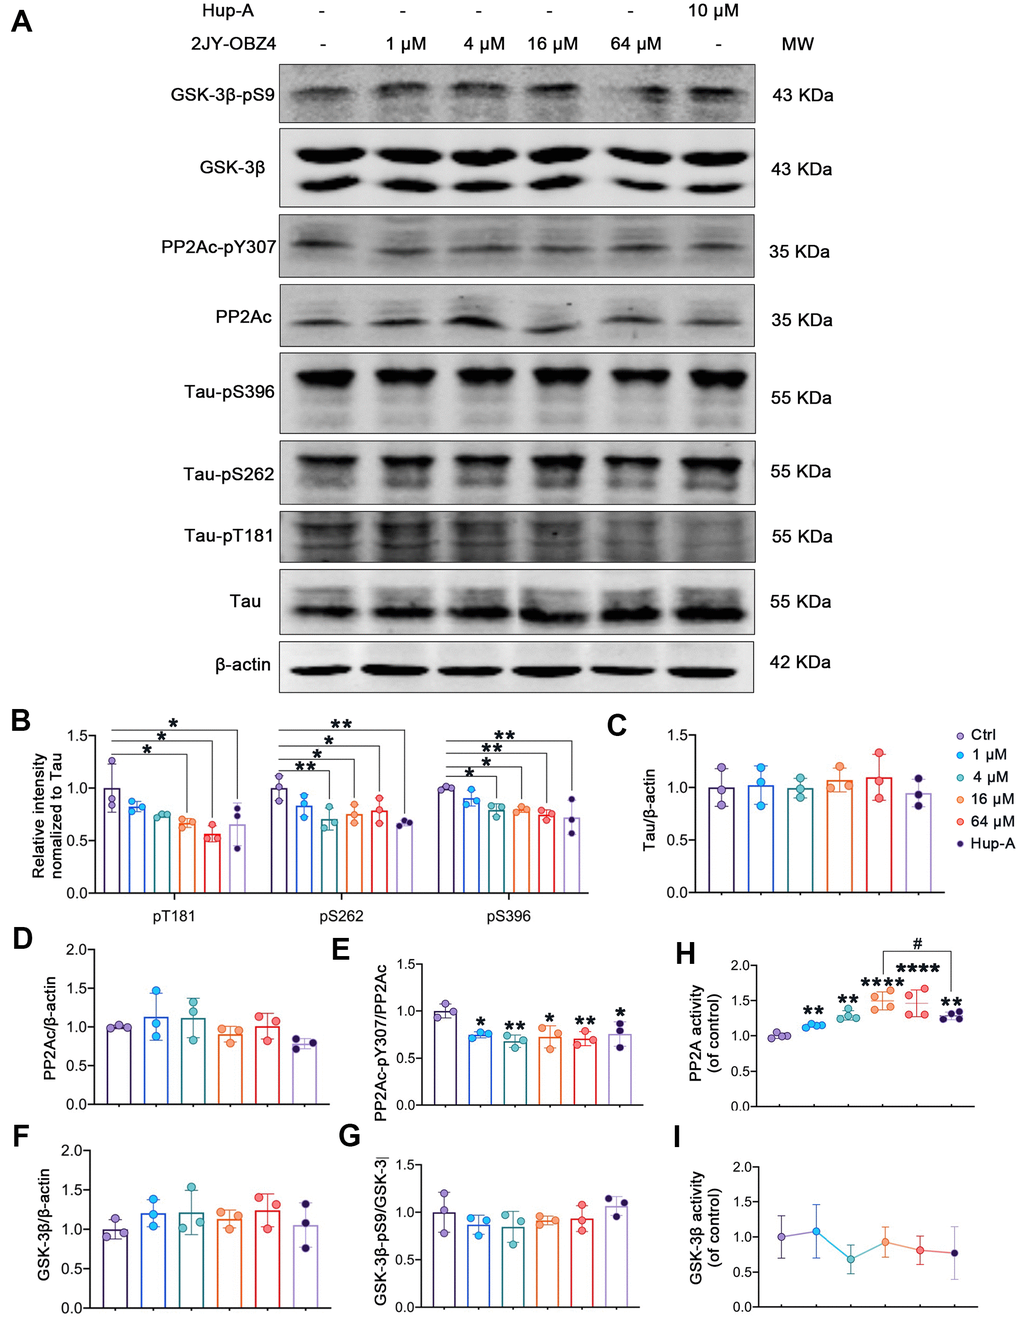 2JY-OBZ4 induced tau dephosphorylation in HEK293/tau cells via upregulating the activity of PP2A. (A) Western blots and (B–G) quantitative analysis for Tau-pT181, Tau-pS262, Tau-pS396, Tau, PP2Ac, PP2Ac-pY307 (PP2Ac phosphor-Tyr307, an indicator of inhibition of PP2A), GSK-3β, GSK-3β-pS9 (GSK-3β phosphor-Ser9, an indicator of inhibition of GSK-3β) in HEK293-hTau cells. PP2Ac represents catalytic subunit of PP2A holoenzyme. MW Molecular weight. n = 3 per group. (H) PP2A activity was detected in HEK293-hTau cells. n = 4 per group. (I) GSK-3β activity was detected in HEK293-hTau cells. n = 3 per group. p value significance is calculated from a one-way ANOVA, data are represented as mean ± SEM. *p 